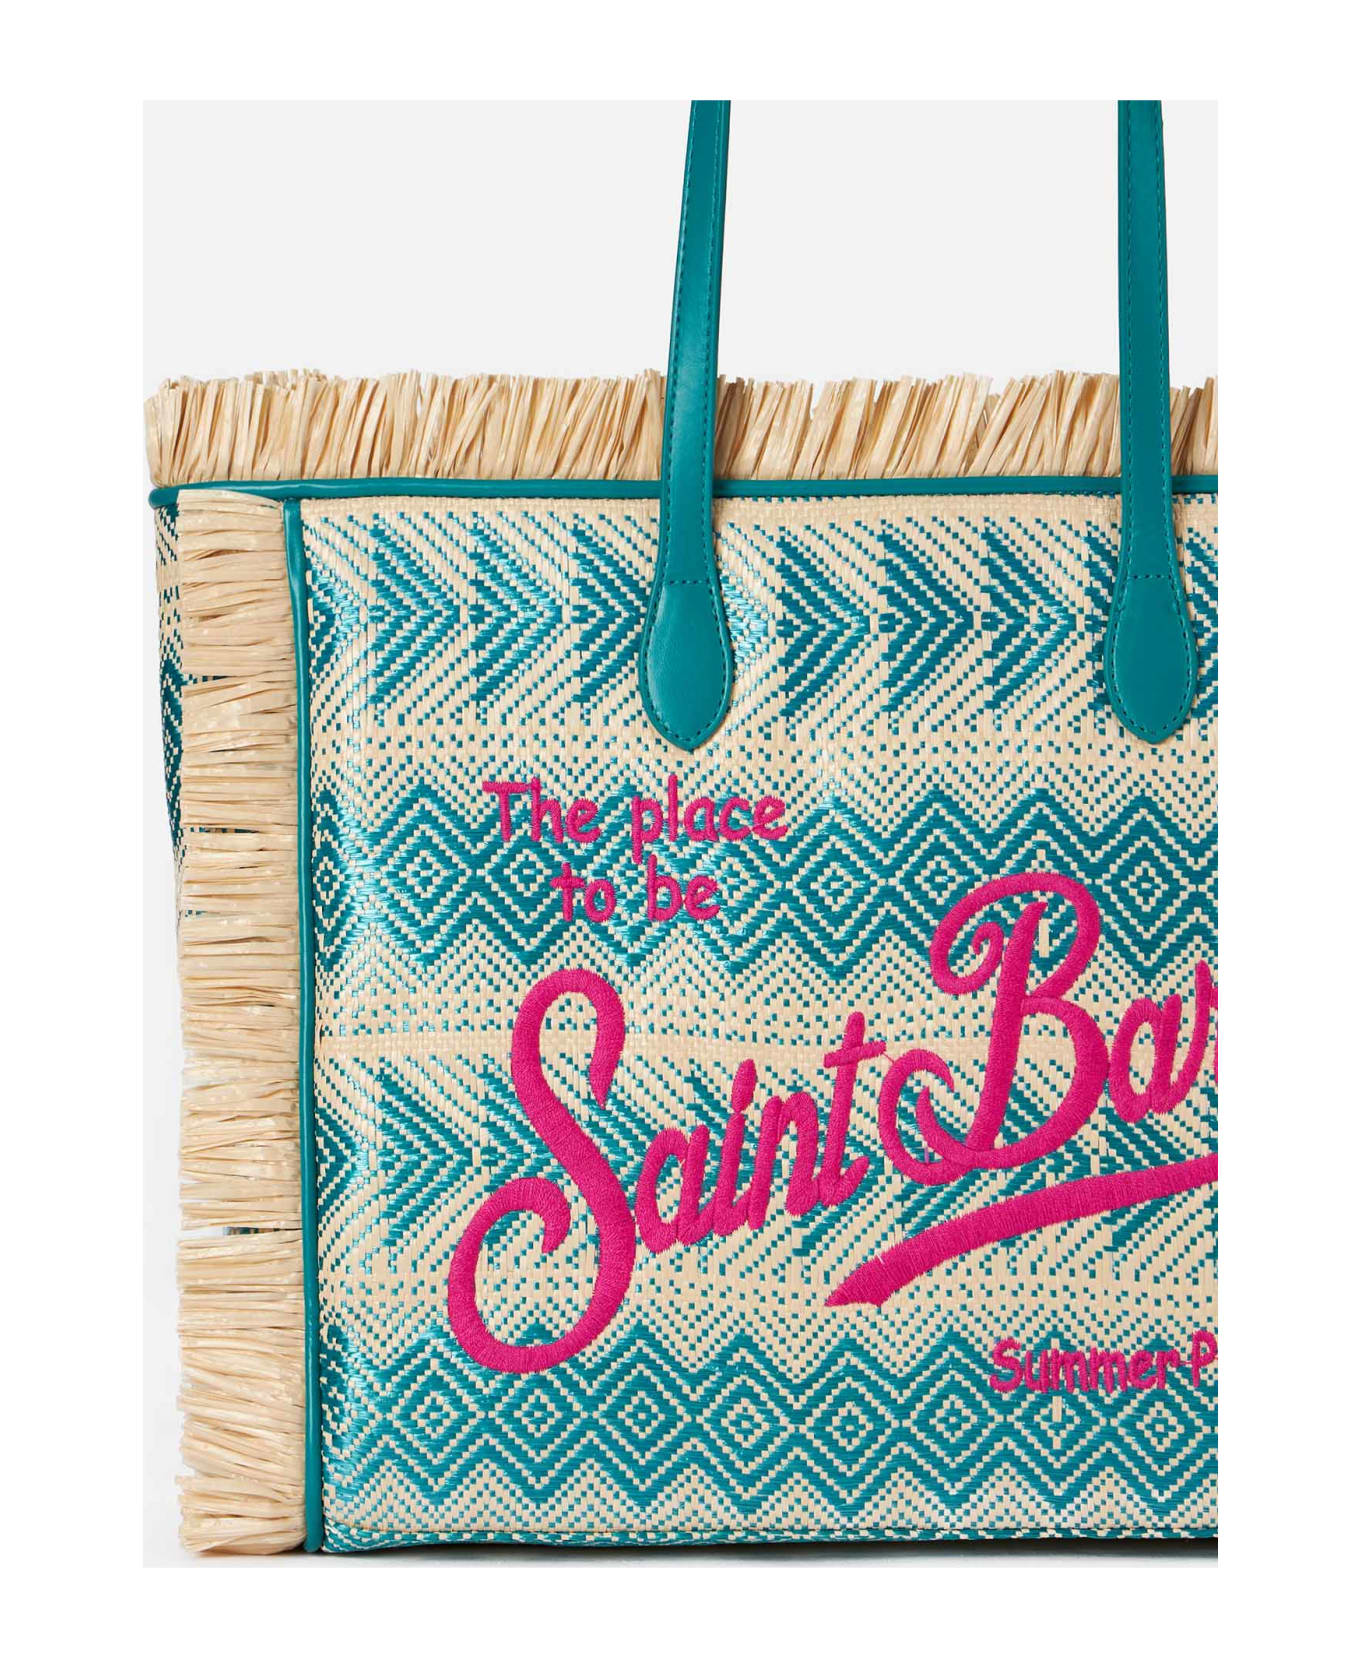 MC2 Saint Barth Vanity Straw Bag With Embroidery And Geometric Pattern - SKY